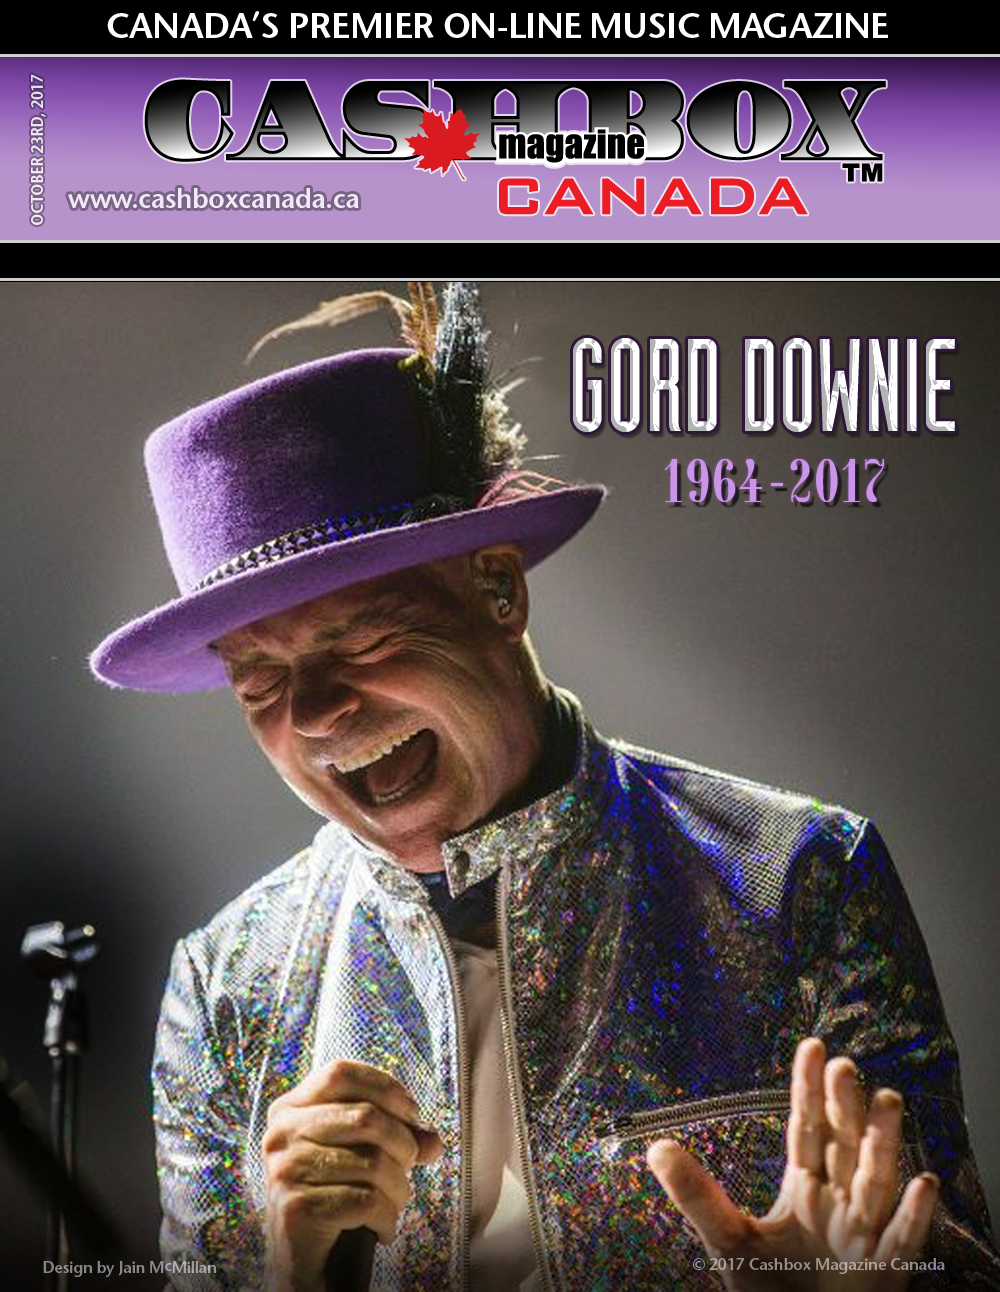 October 23rd Gord Downie